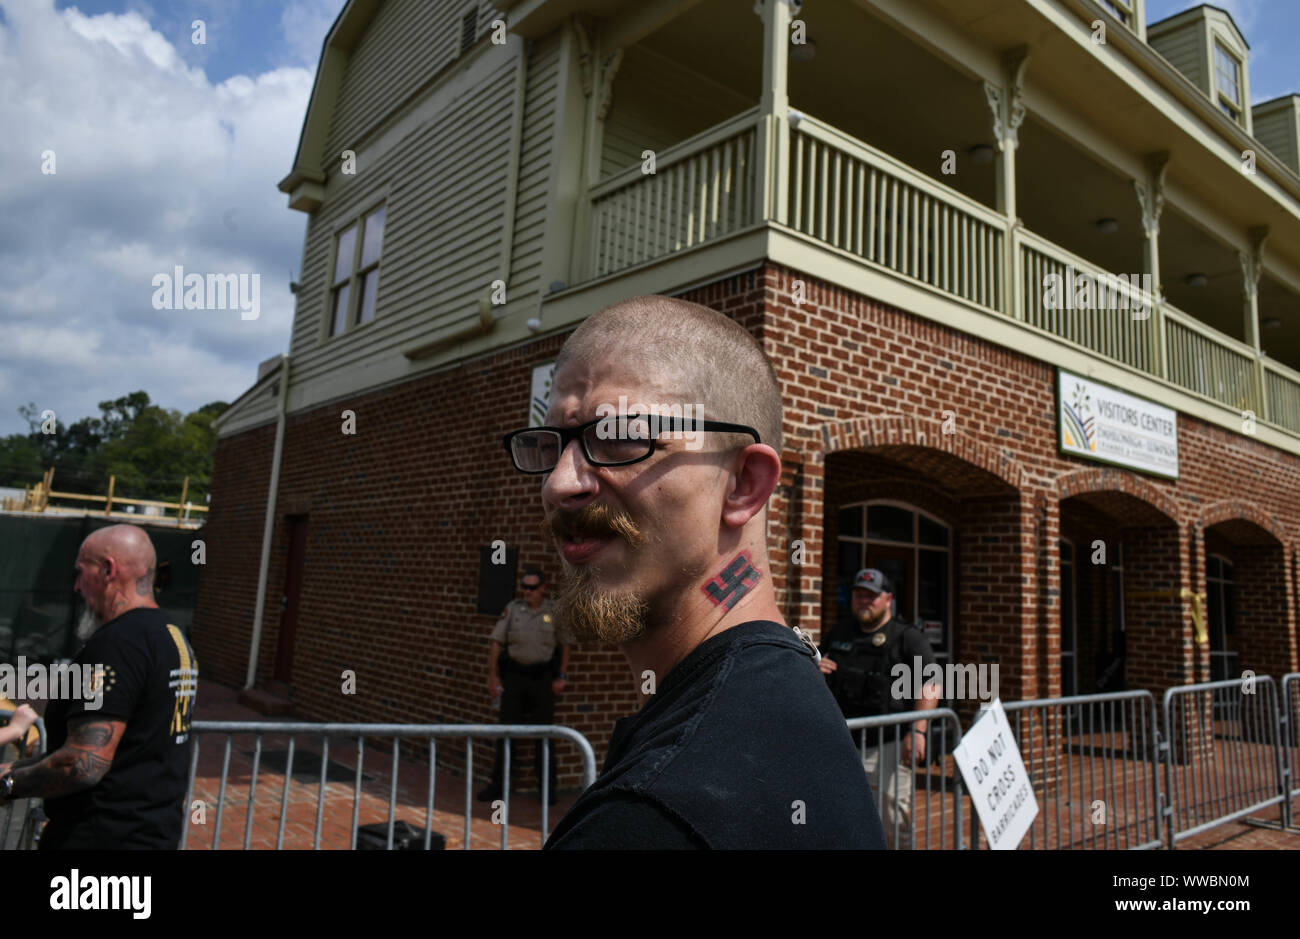 Dahlonega, Georgia, USA. 14th Sep, 2019. Tennessee resident KYNAN DUTTON, who once moved to North Dakota to build an all-white enclave there, watches a rally organized by longtime white nationalist leader Chester Doles in Dahonega, Georgia on Saturday. Doles billed the event, which drew around 50 supporters, as an 'American Patriot Rally'' to honor President Trump. Around 100 counter-protesters including affiliates of the so-called 'Antifa'' movement showed up, as well as hundreds of law enforcement agents from surrounding counties as shops and restaurants in the small, north Georgia Stock Photo